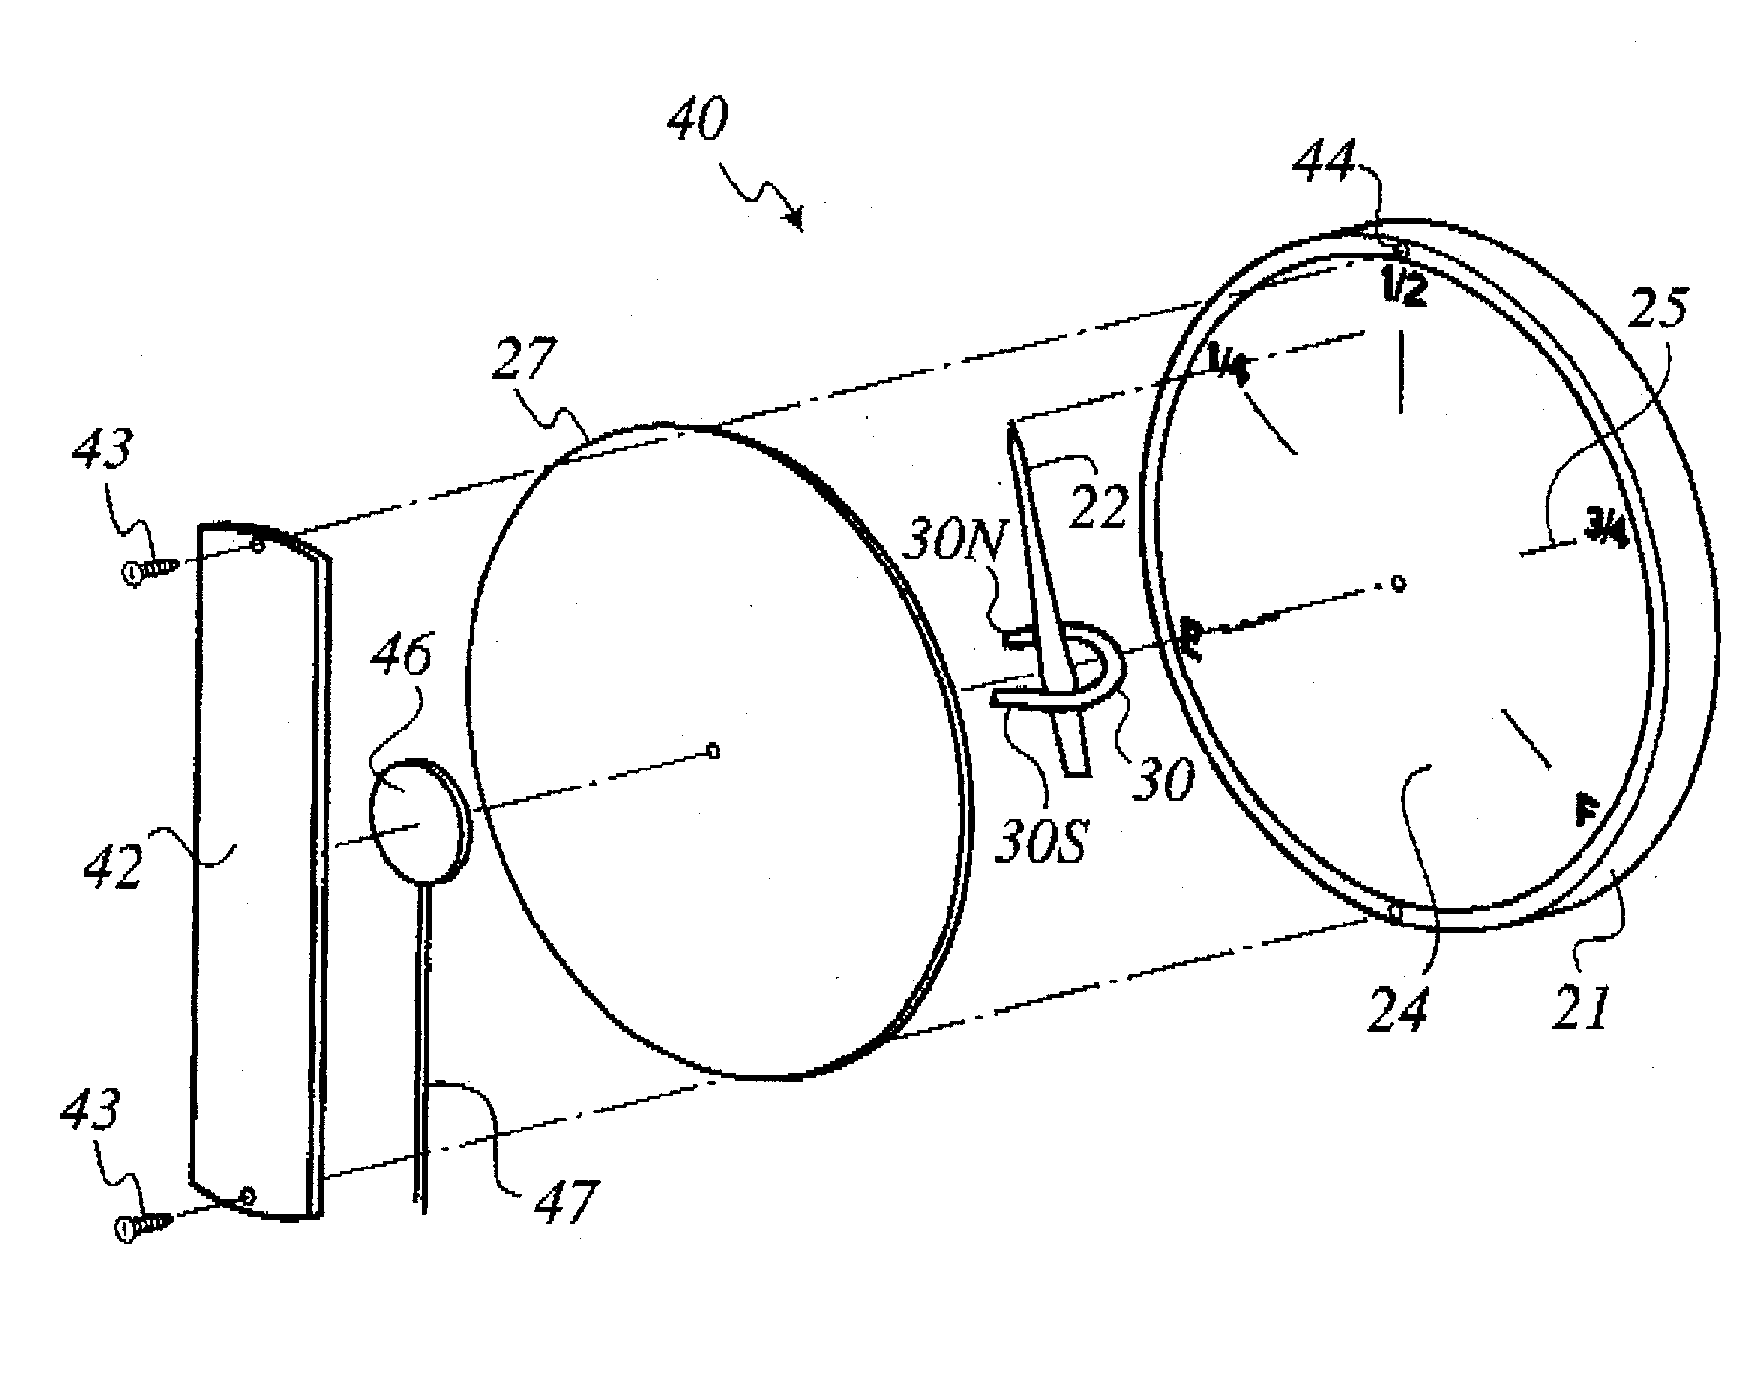 Method for upgrading a dial indicator to provide remote indication capability